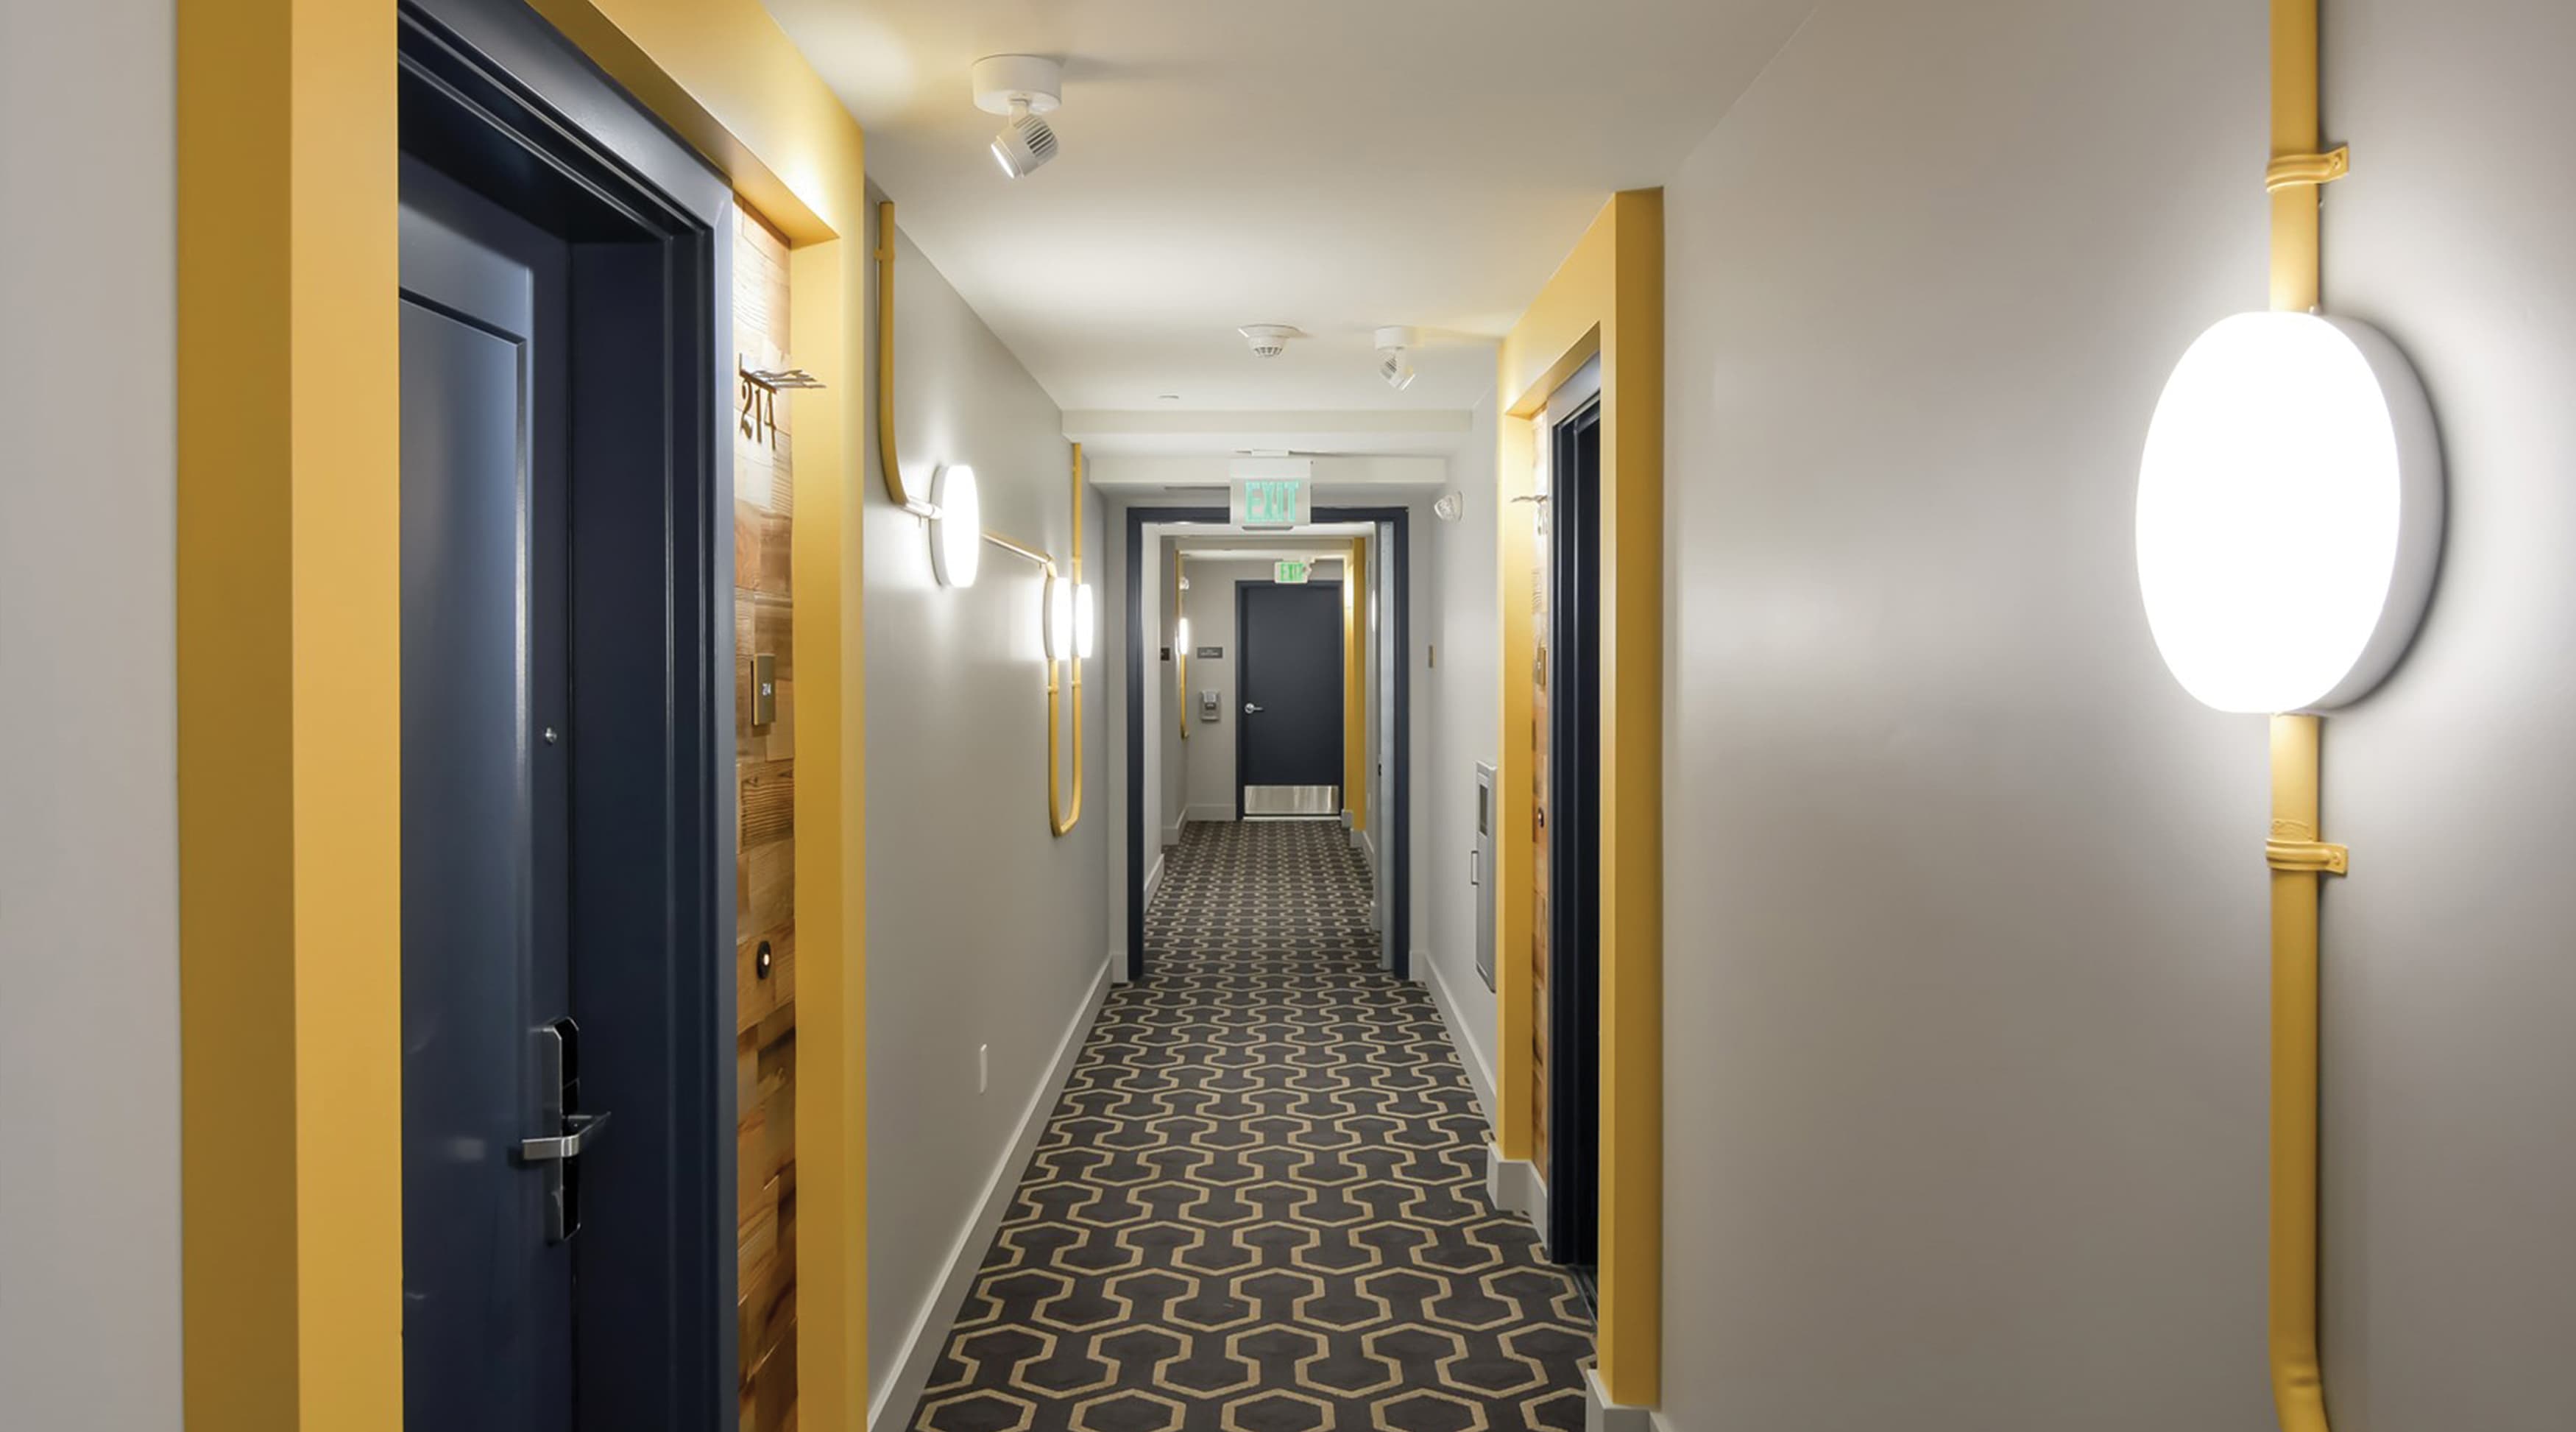 The Martin, San Francisco, Multi-Family Residential and Hospitality Interior Branded Environment